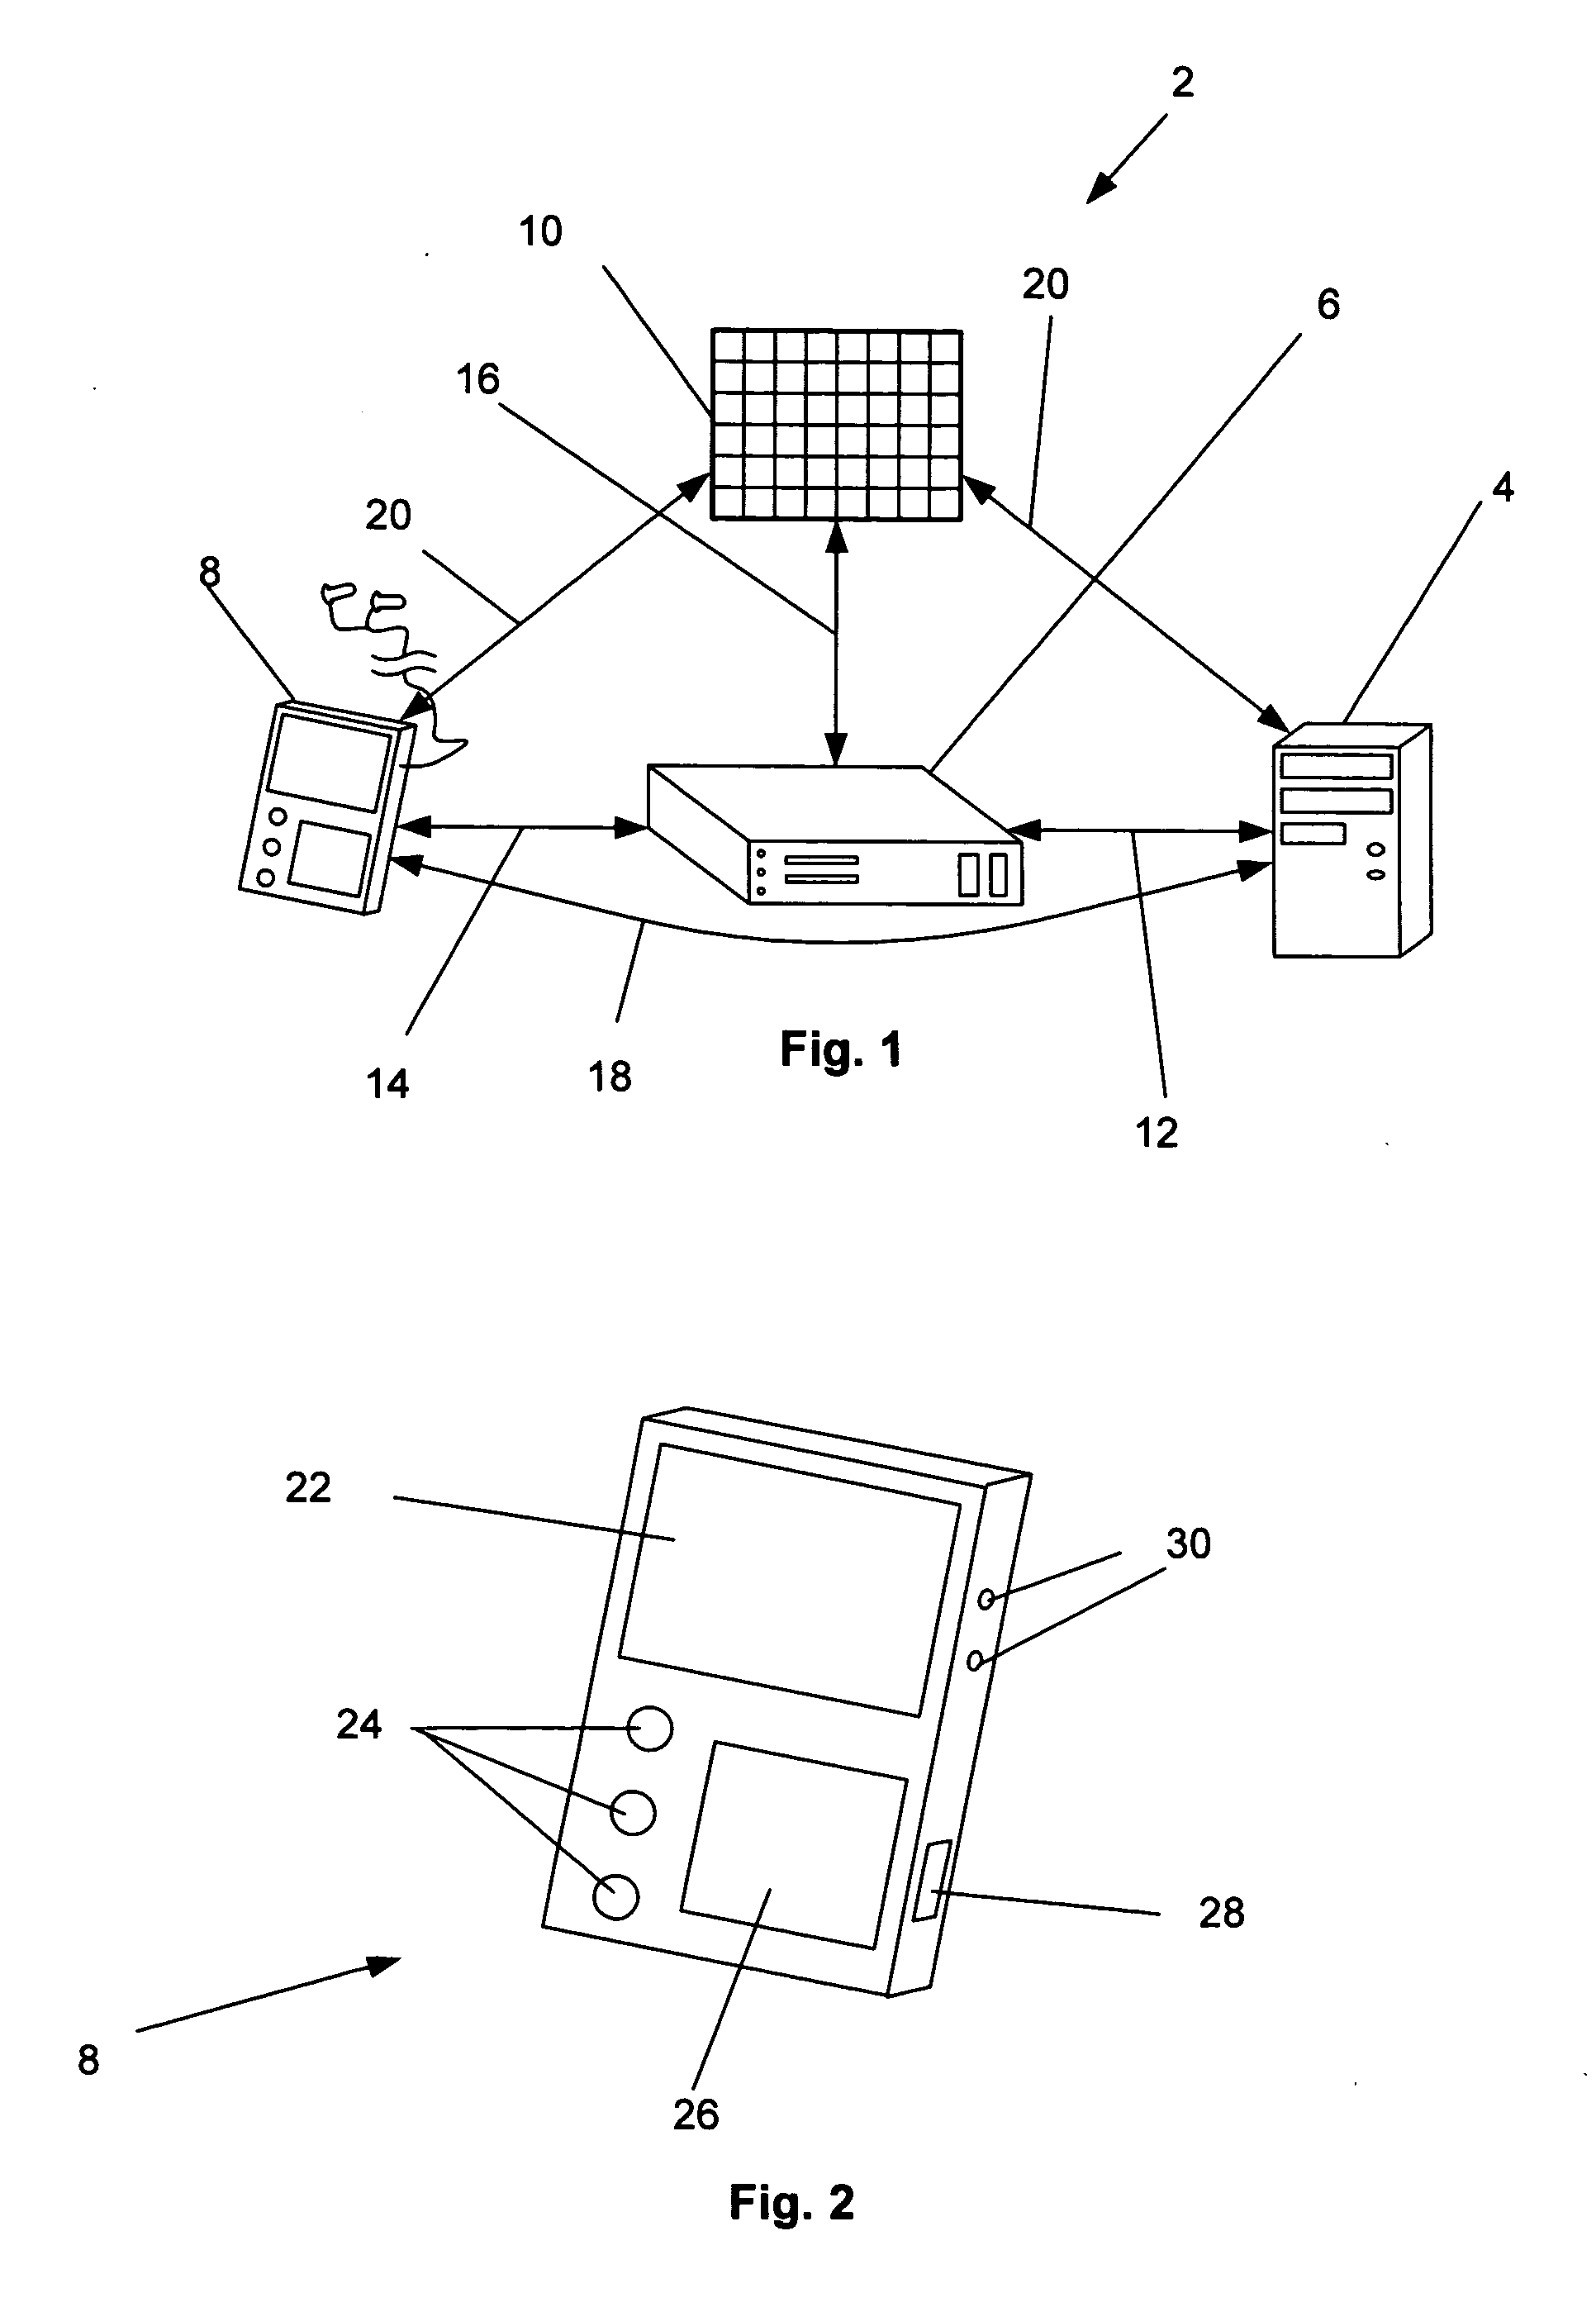 Audiological treatment system and methods of using the same